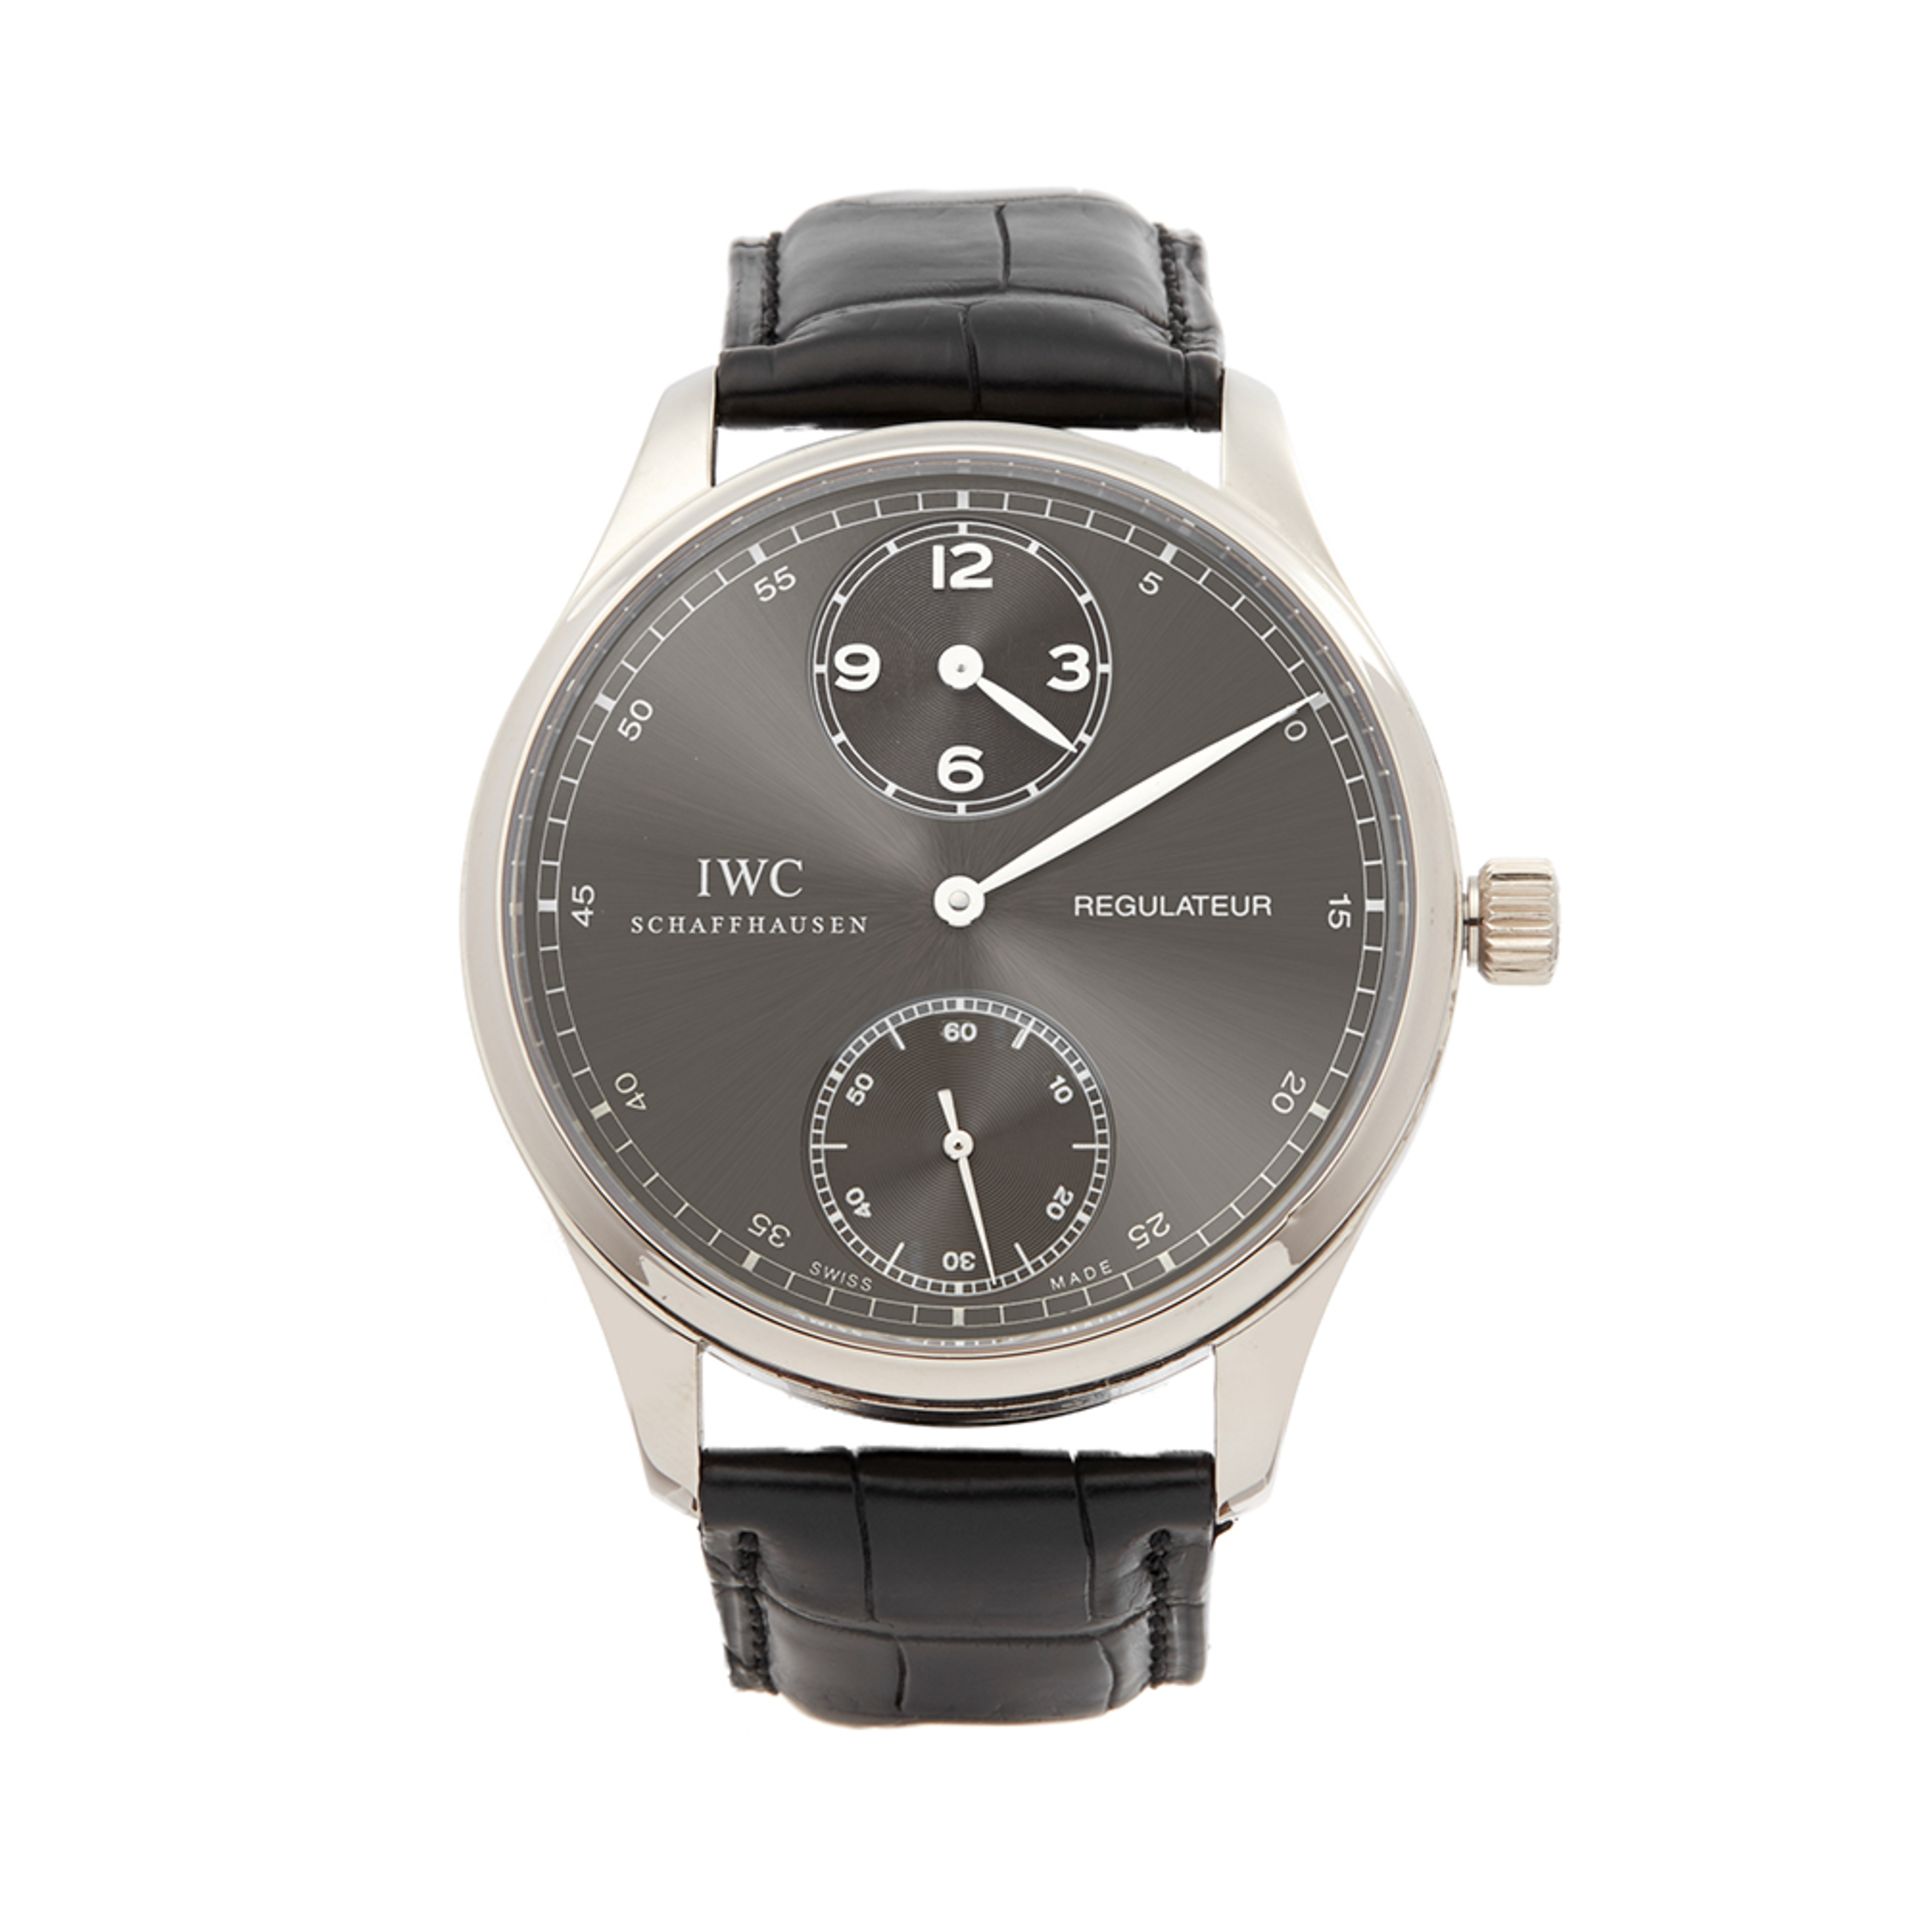 IWC Regulateur 18K White Gold - IW544404 - Image 2 of 9